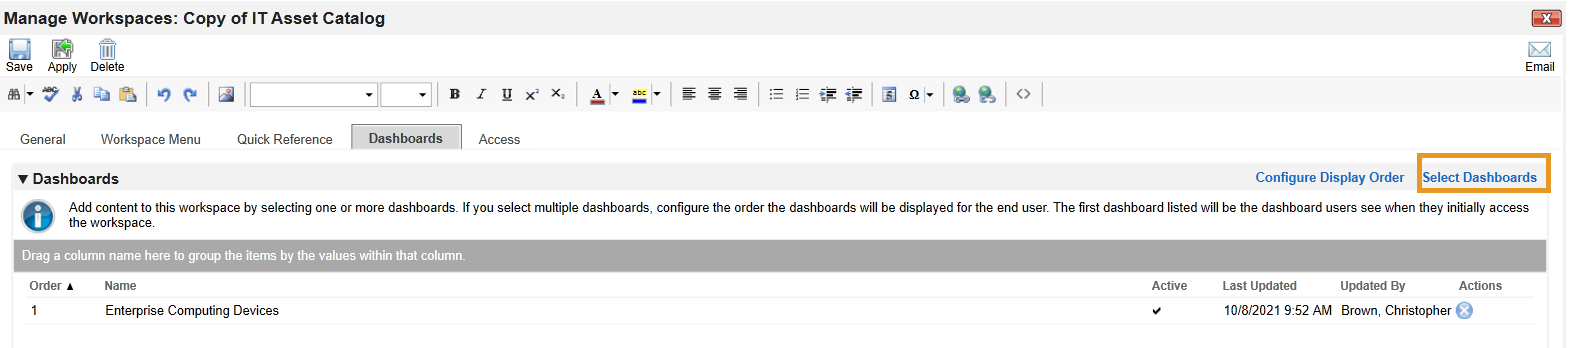 Screenshot showing how to select dashboards from the Dashboards tab